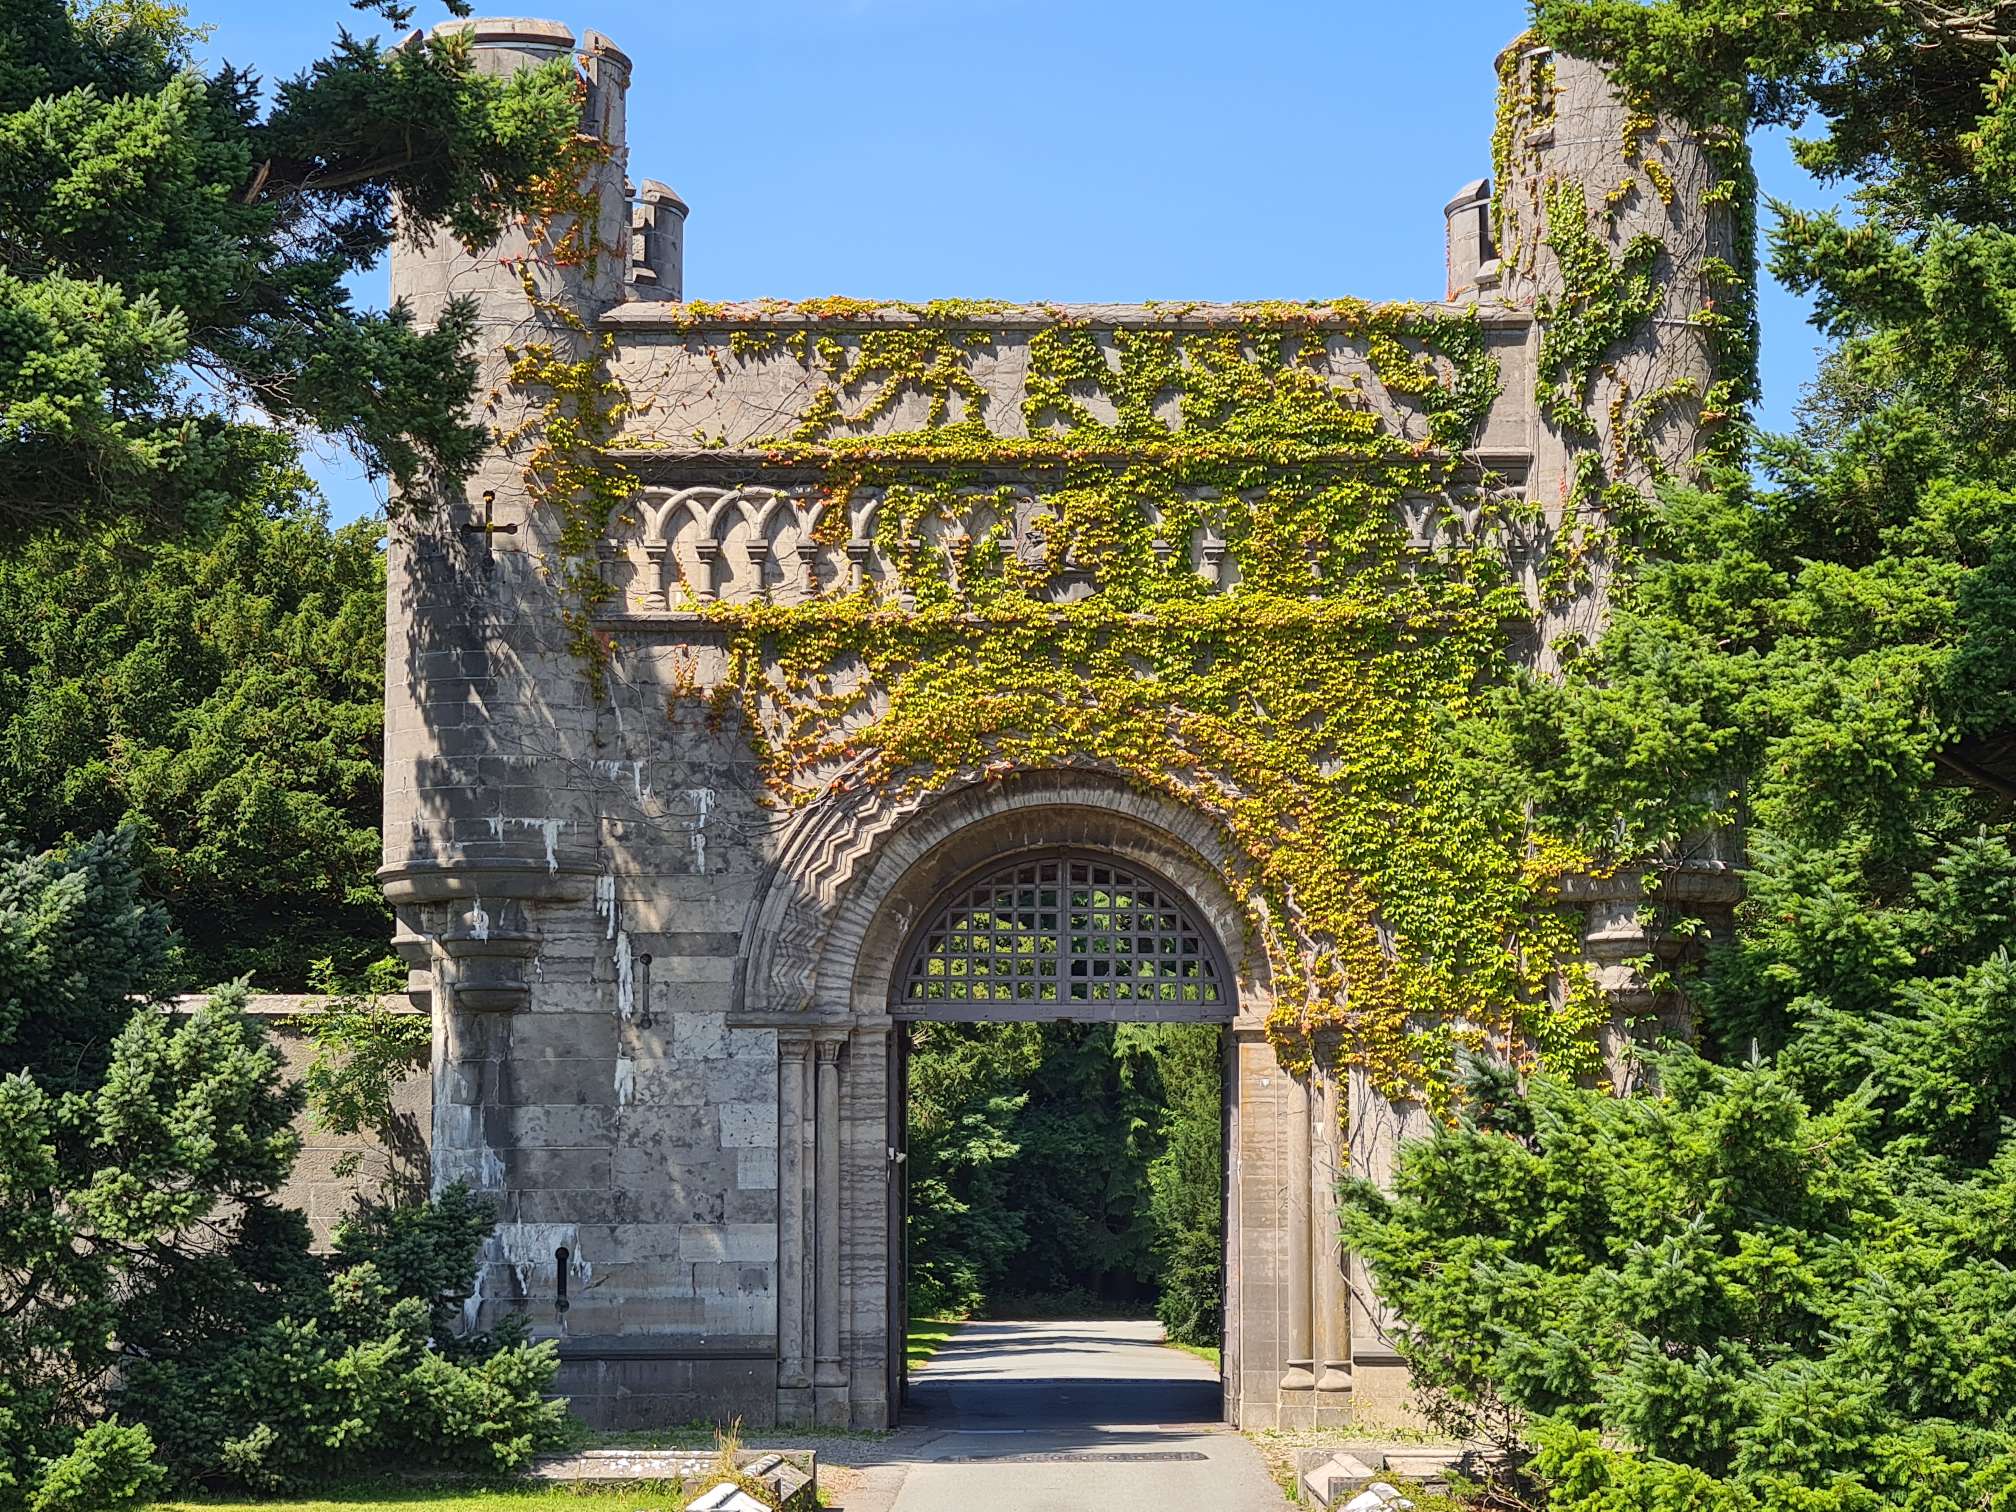 The image shows the gatehouse entrance to the grounds of Penrhyn Castle